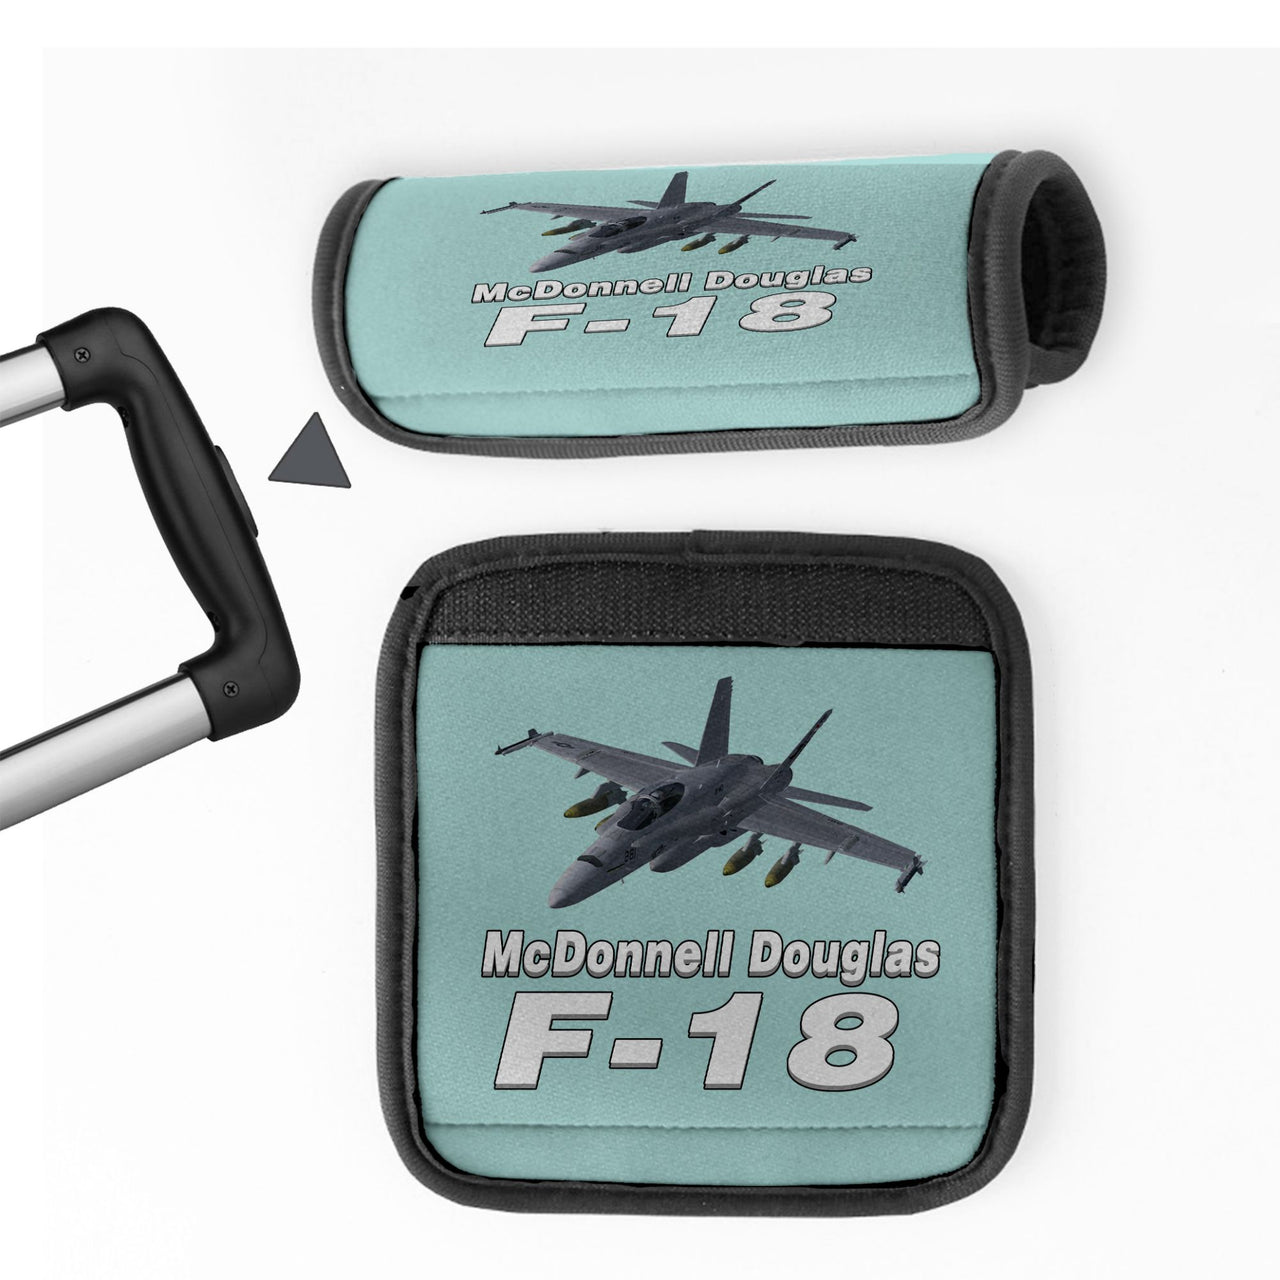 The McDonnell Douglas F18 Designed Neoprene Luggage Handle Covers